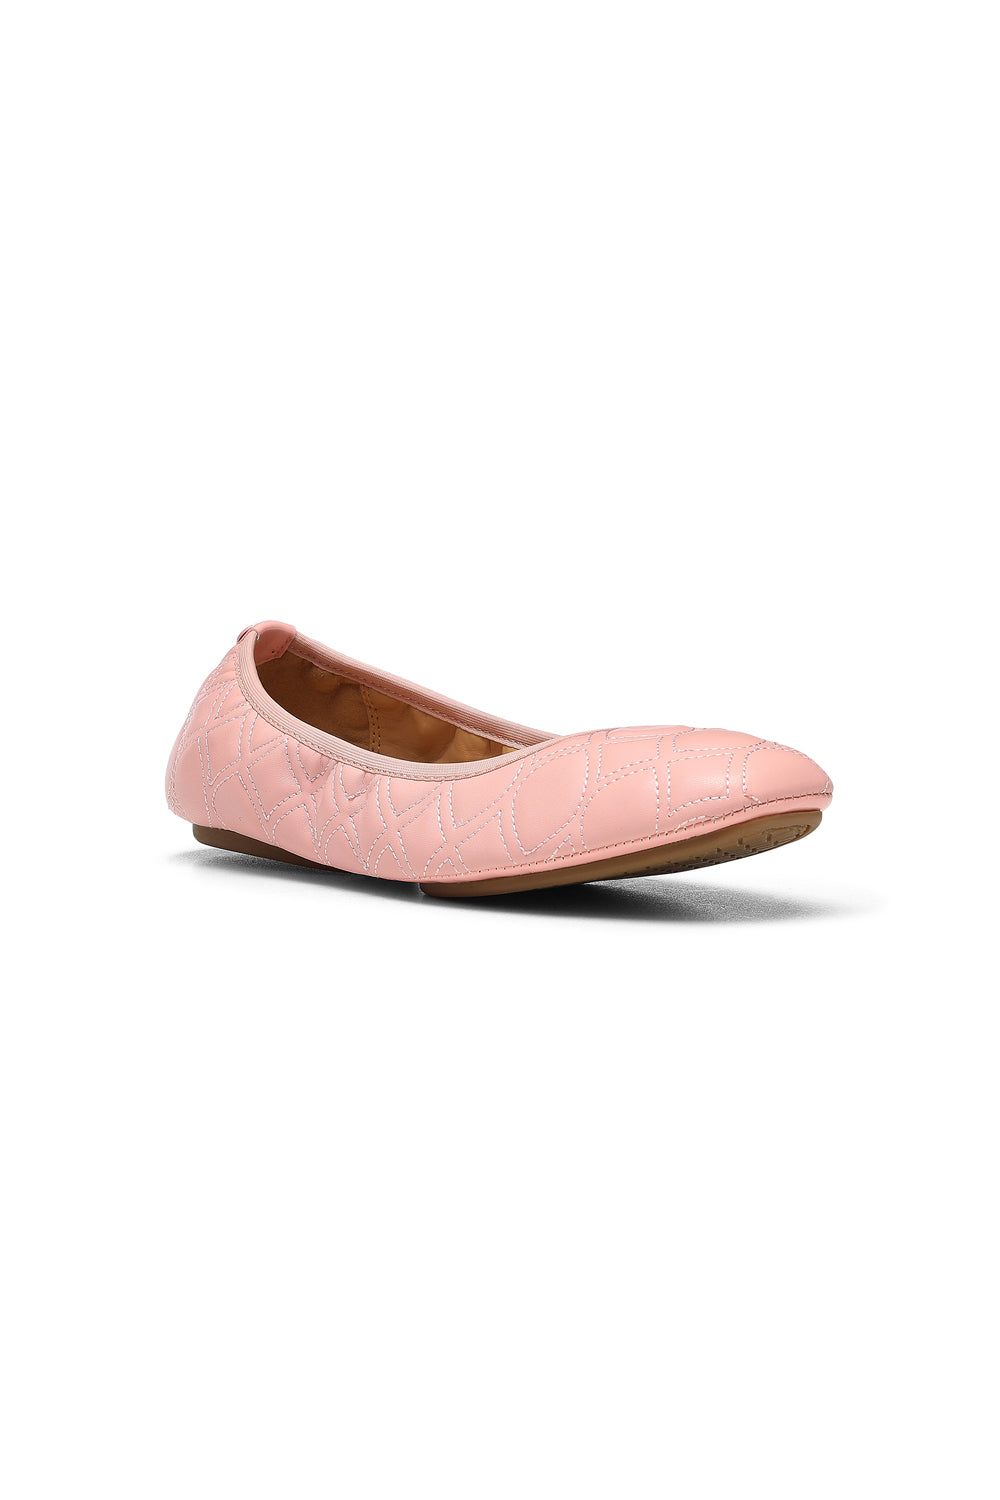 NYDJ Marie Ballet Flats In Soft Nappa - Rose